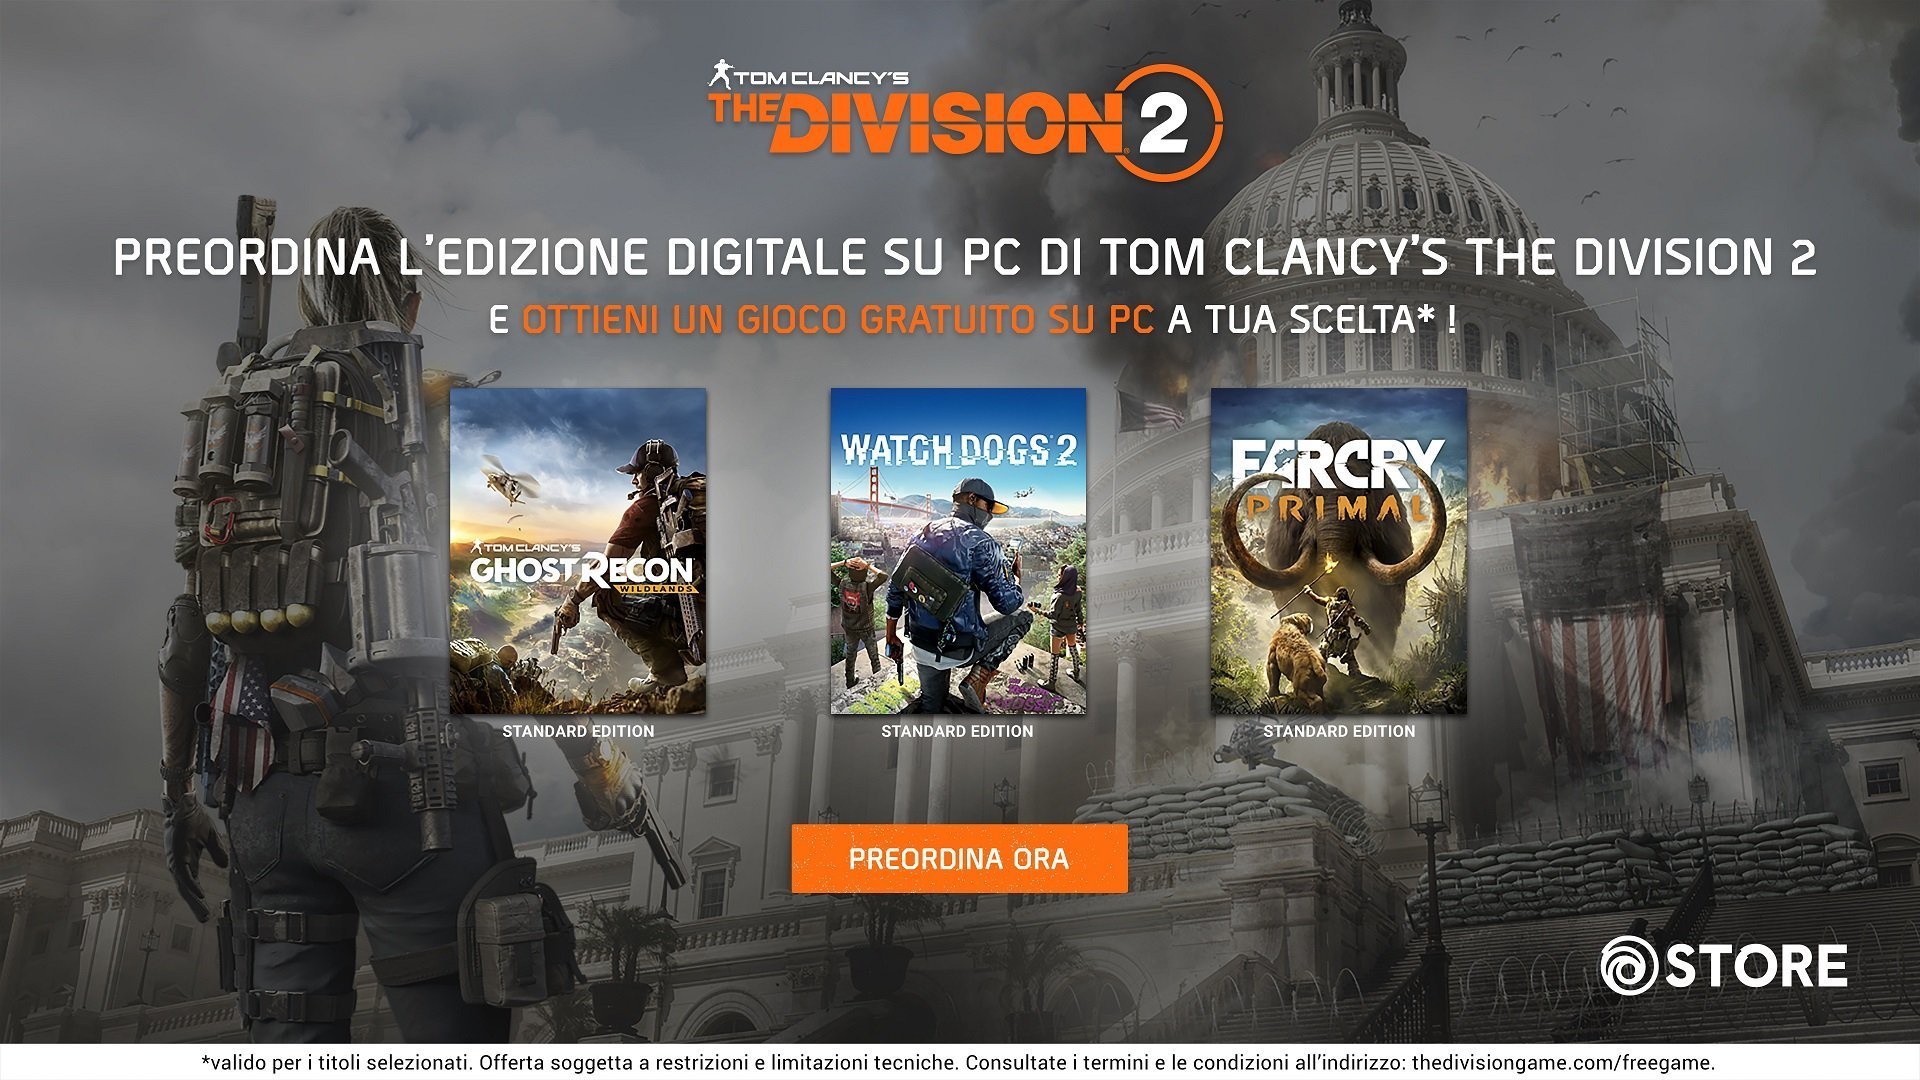 The Division 2 preorder